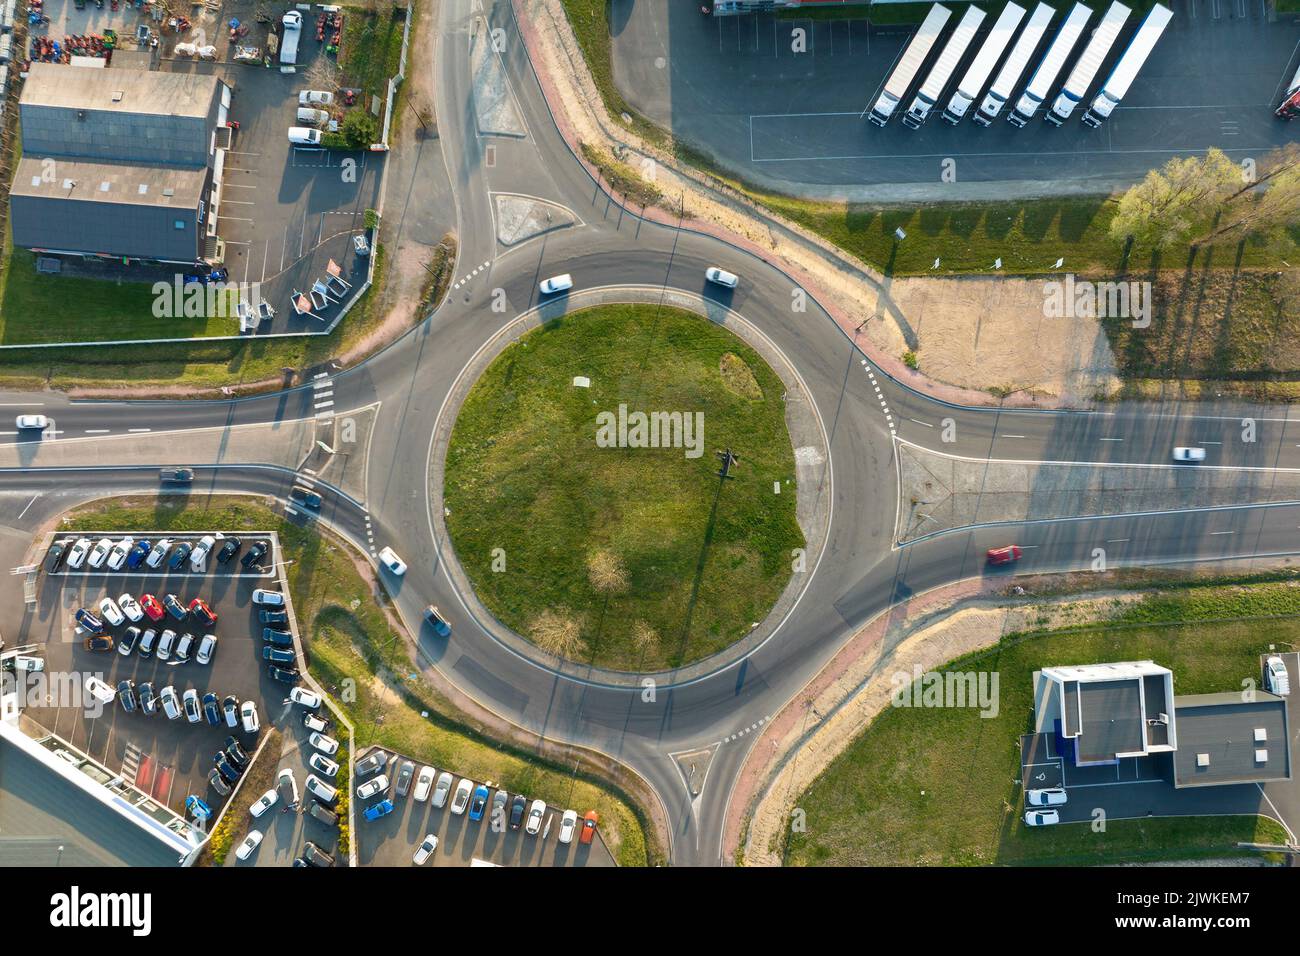 Aerial view of road roundabout intersection with moving heavy traffic ...